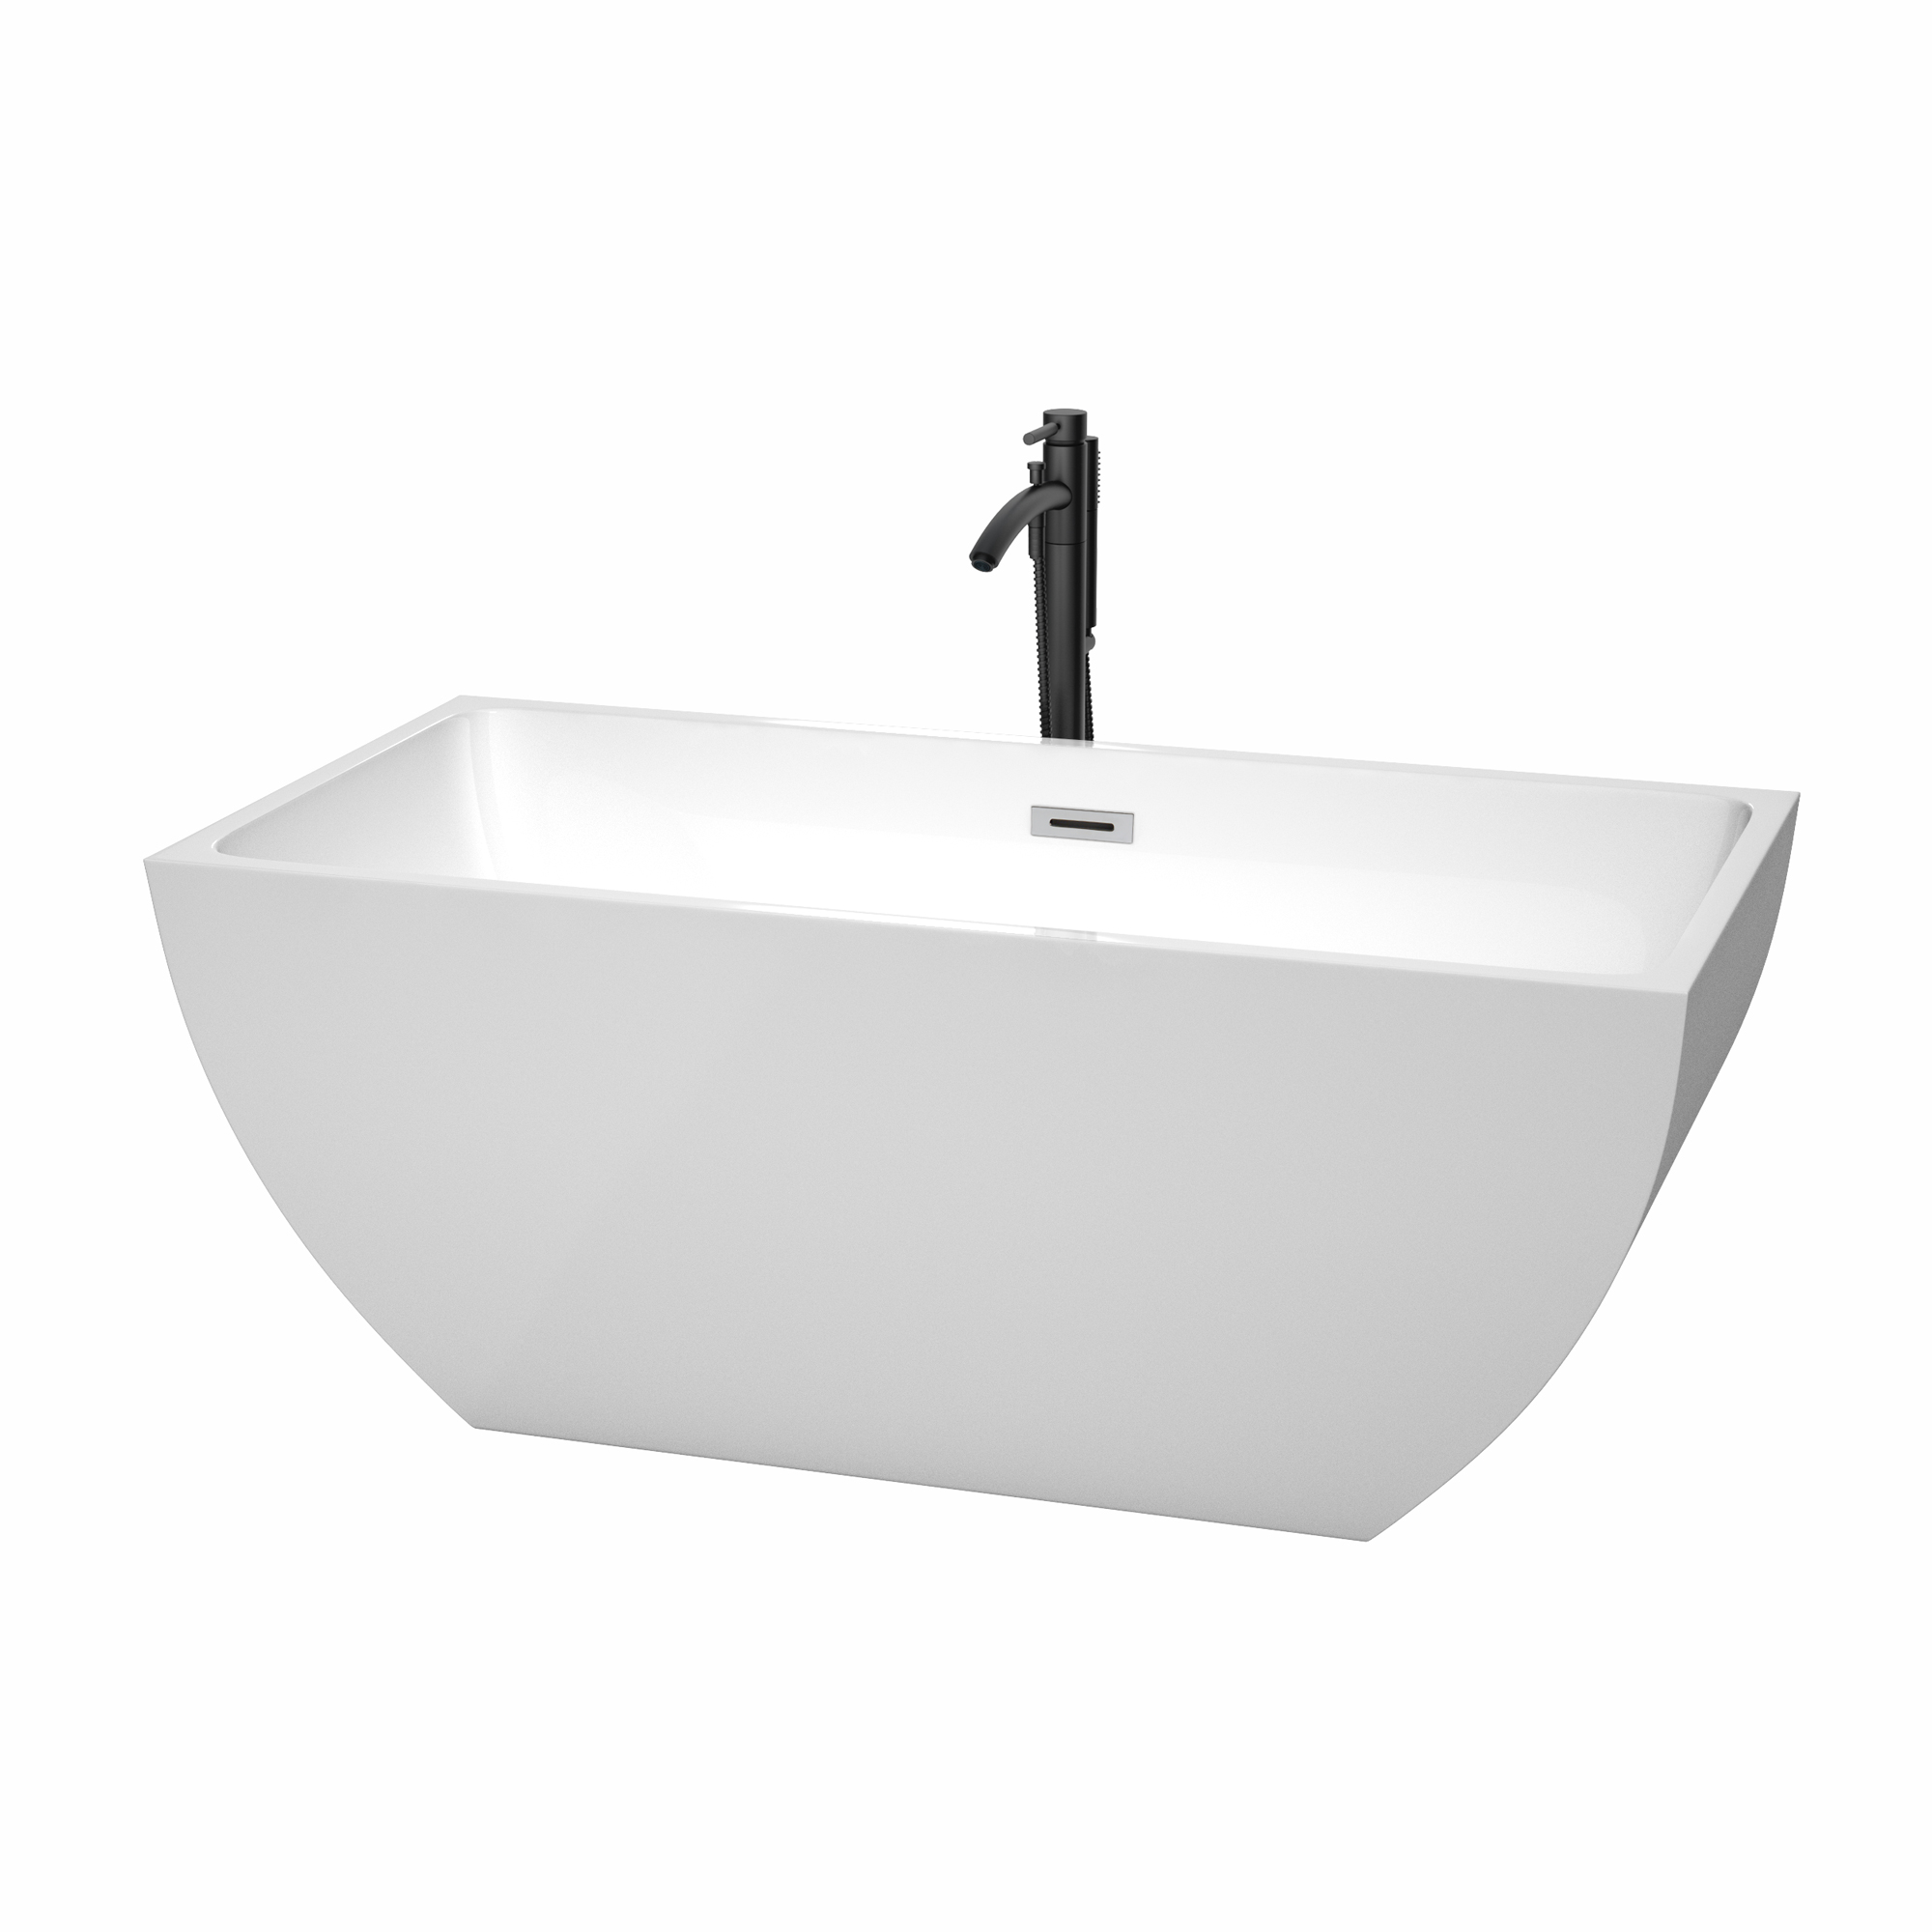 59" Freestanding Bathtub in White with Polished Chrome Trim and Floor Mounted Faucet in Matte Black Finish